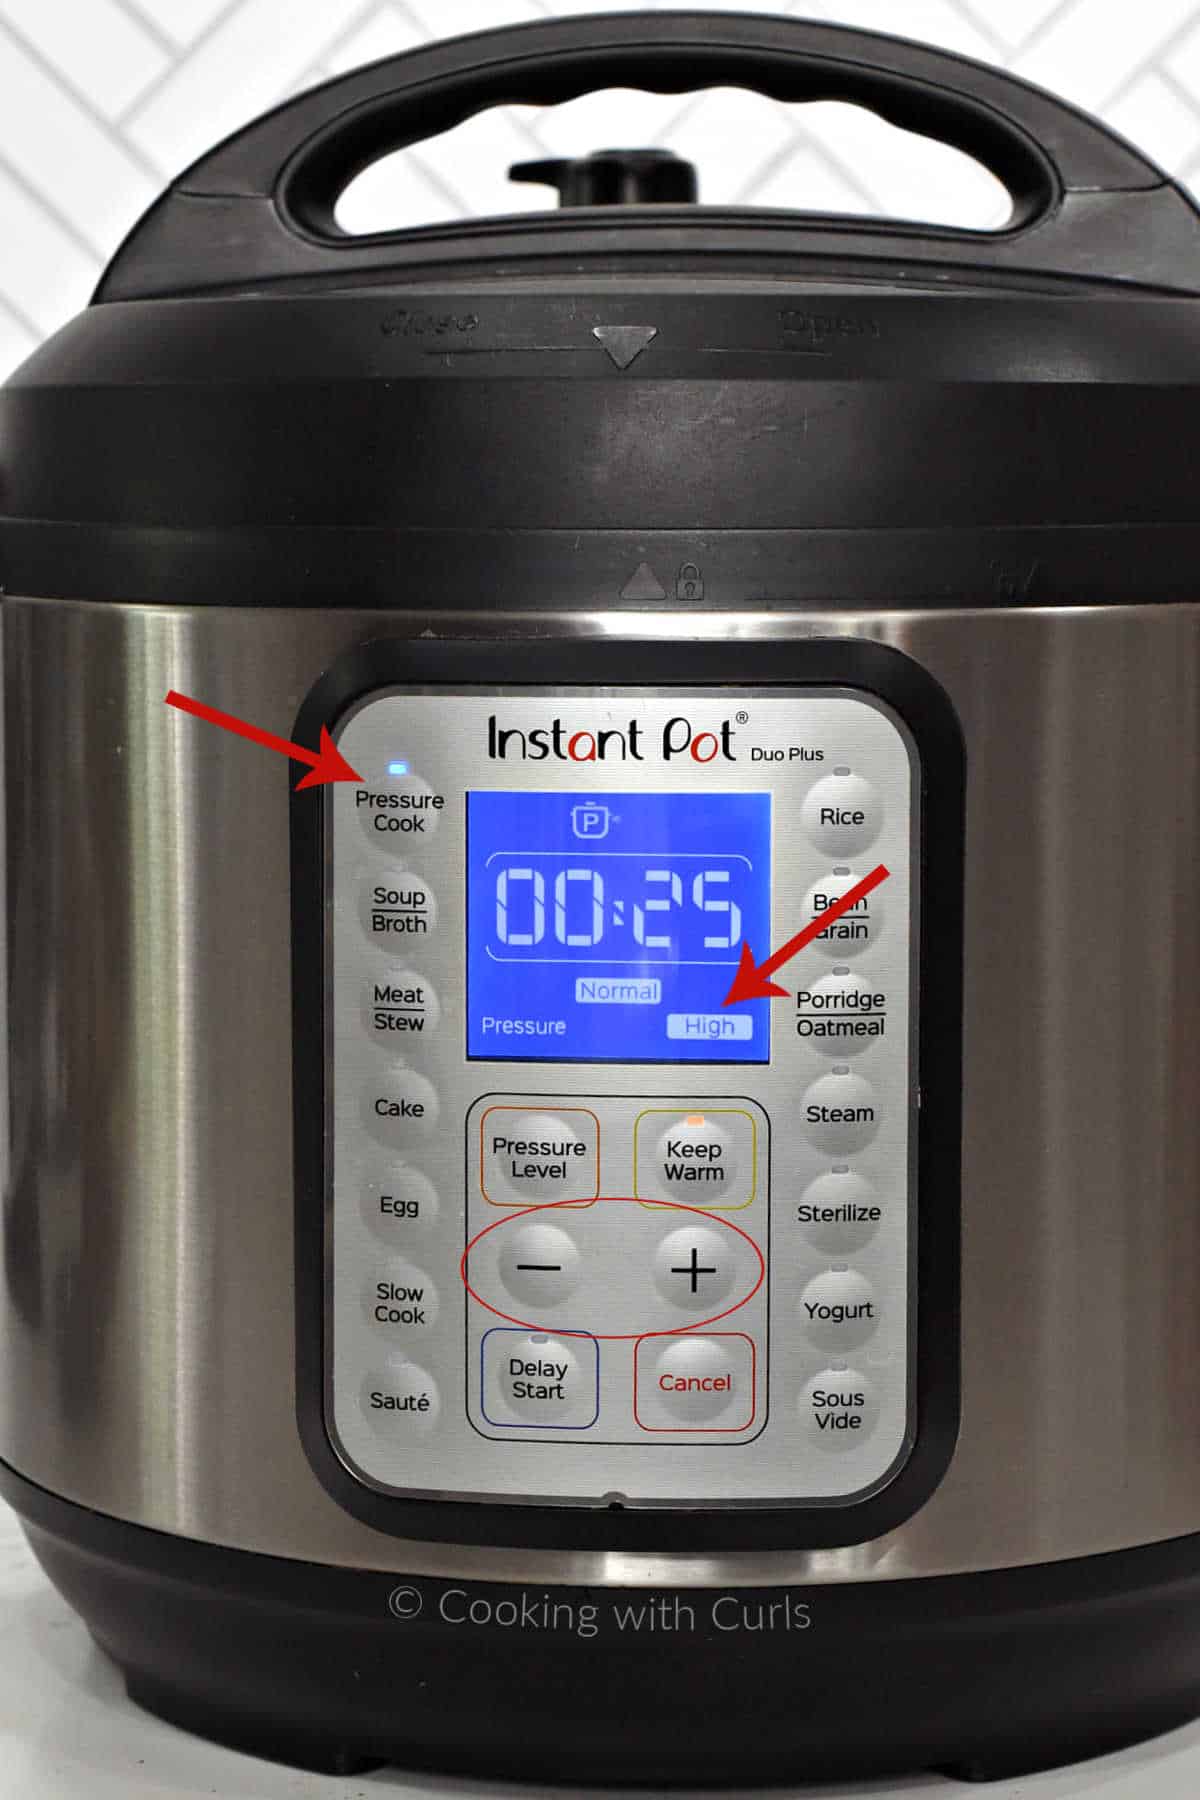 Instant Pot set to 25 minutes on high pressure cook setting.